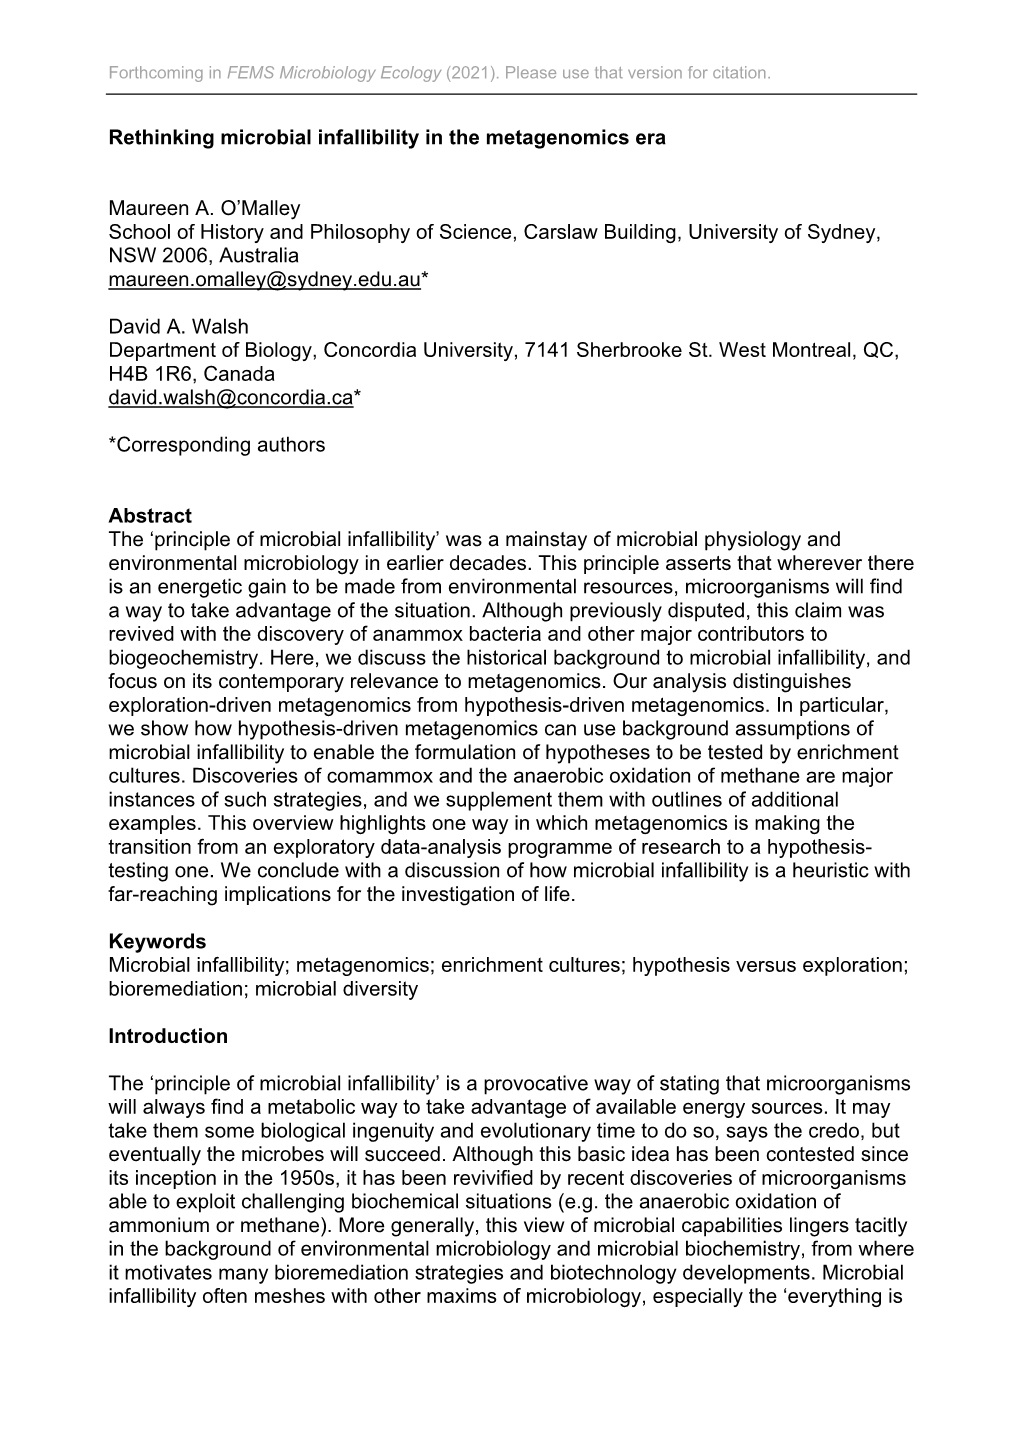 Rethinking Microbial Infallibility in the Metagenomics Era Maureen A. O'malley School of History and Philosophy of Science, Ca